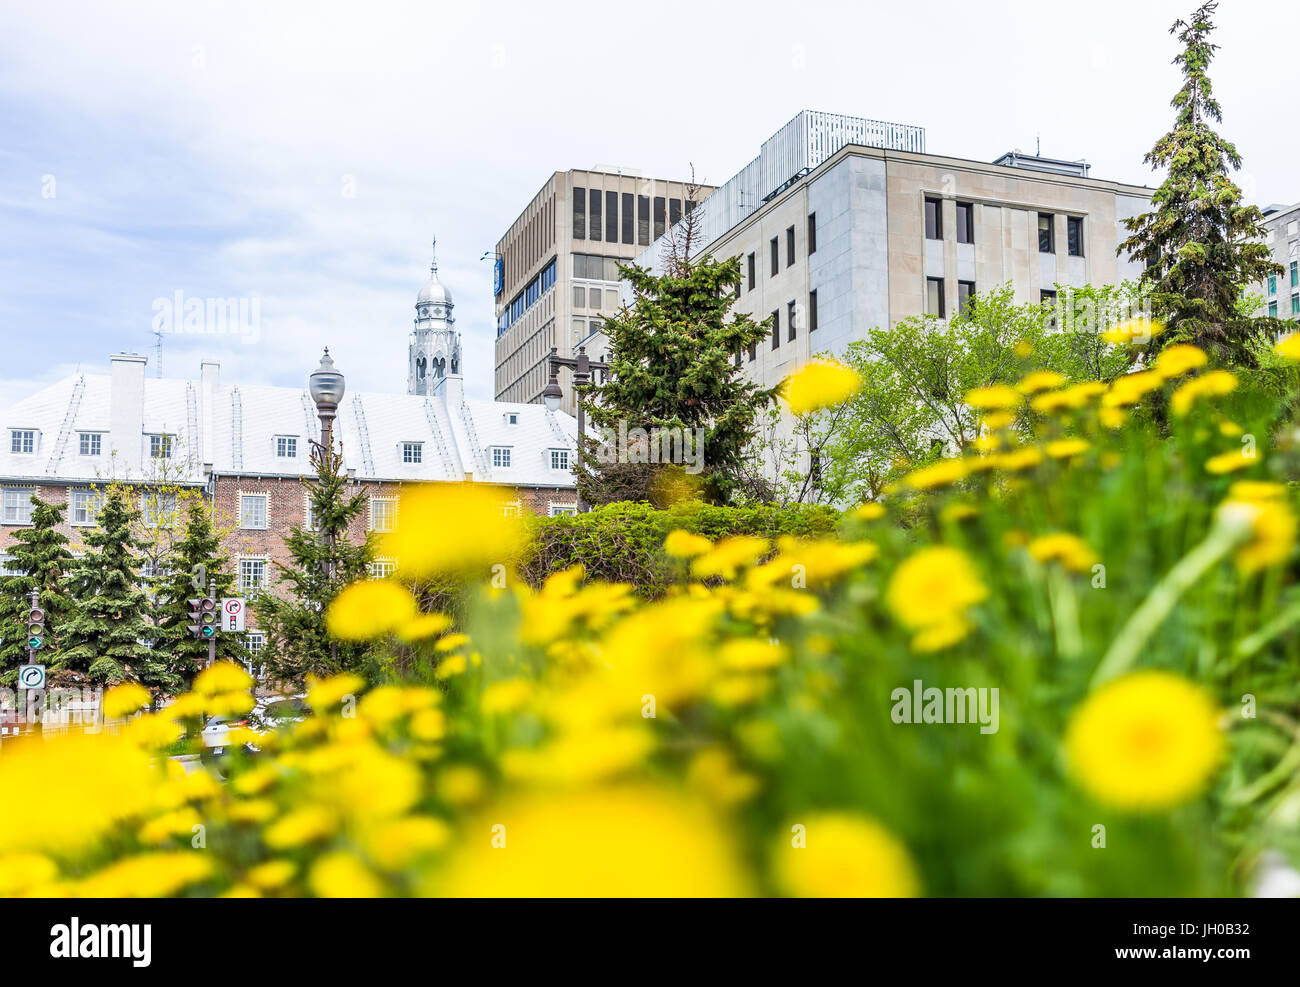 Quebec City, Canada - May 29, 2017: Old town church building and RBC bank sign by Avenue Honore-Mercier street and yellow dandelions in summer Stock Photo